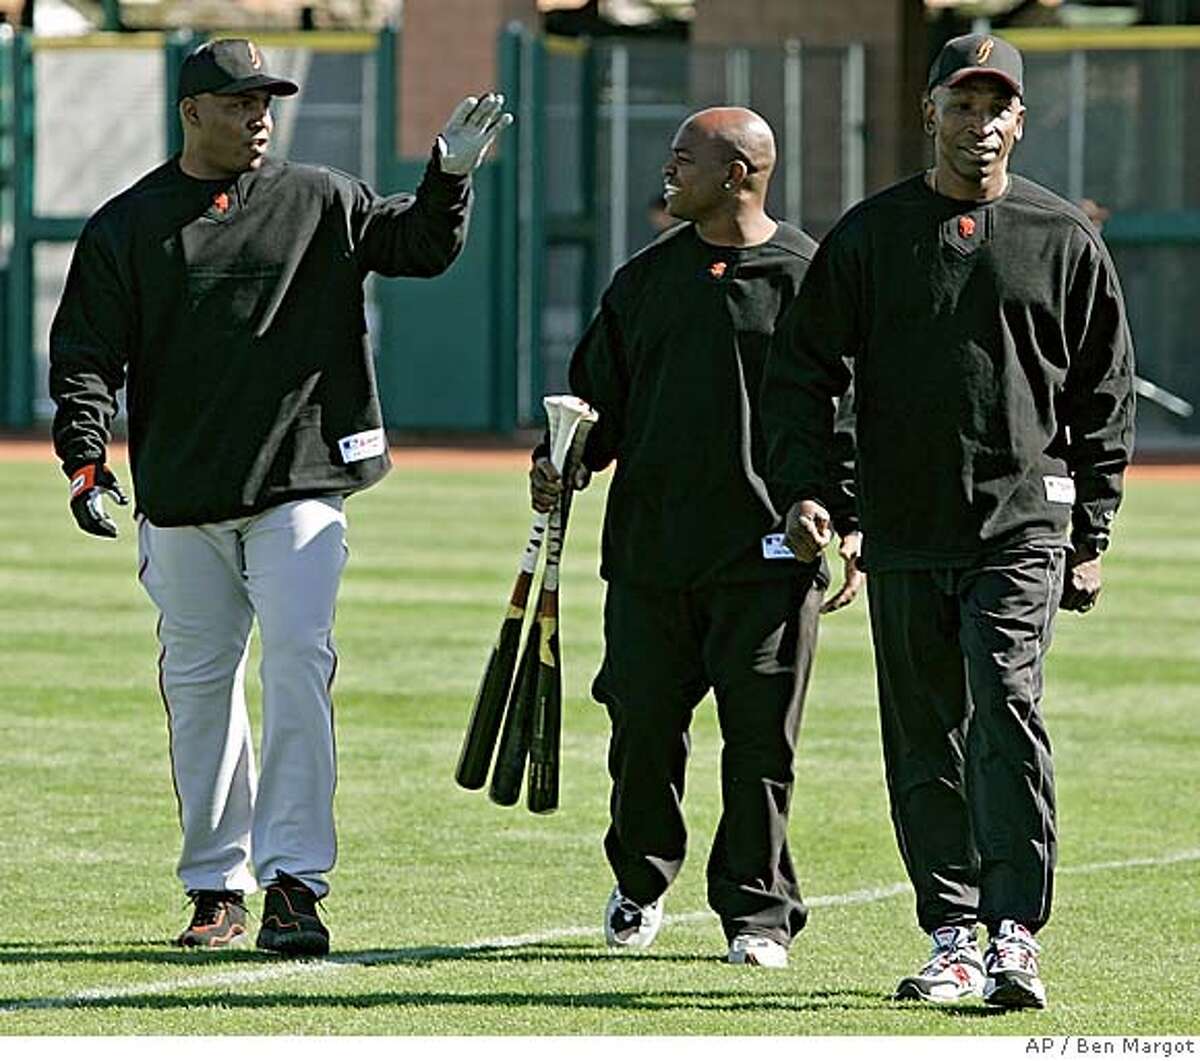 San Francisco Giants' Barry Bonds, left, gestures beside trainers Greg Oliver, center, and Harvey Shields during a Major League baseball spring training workout Wednesday, Feb. 22, 2006, in Scottsdale, Ariz. (AP Photo/Ben Margot) EFE OUT